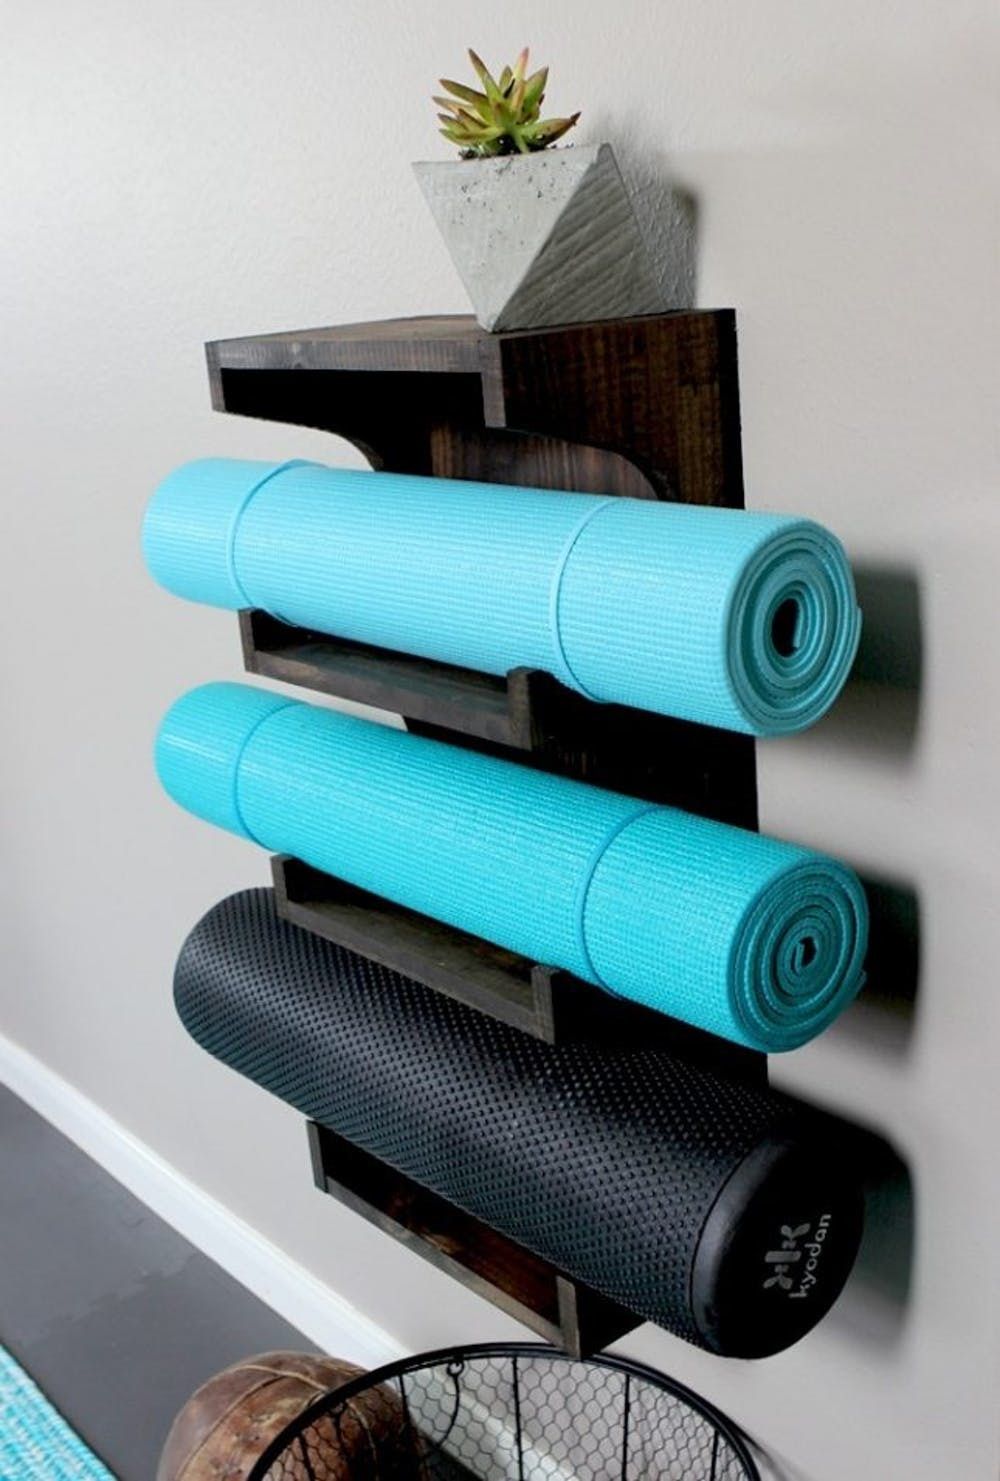 19 Small-Space Home Gym Hacks You Need to Keep Those Resolutions Going